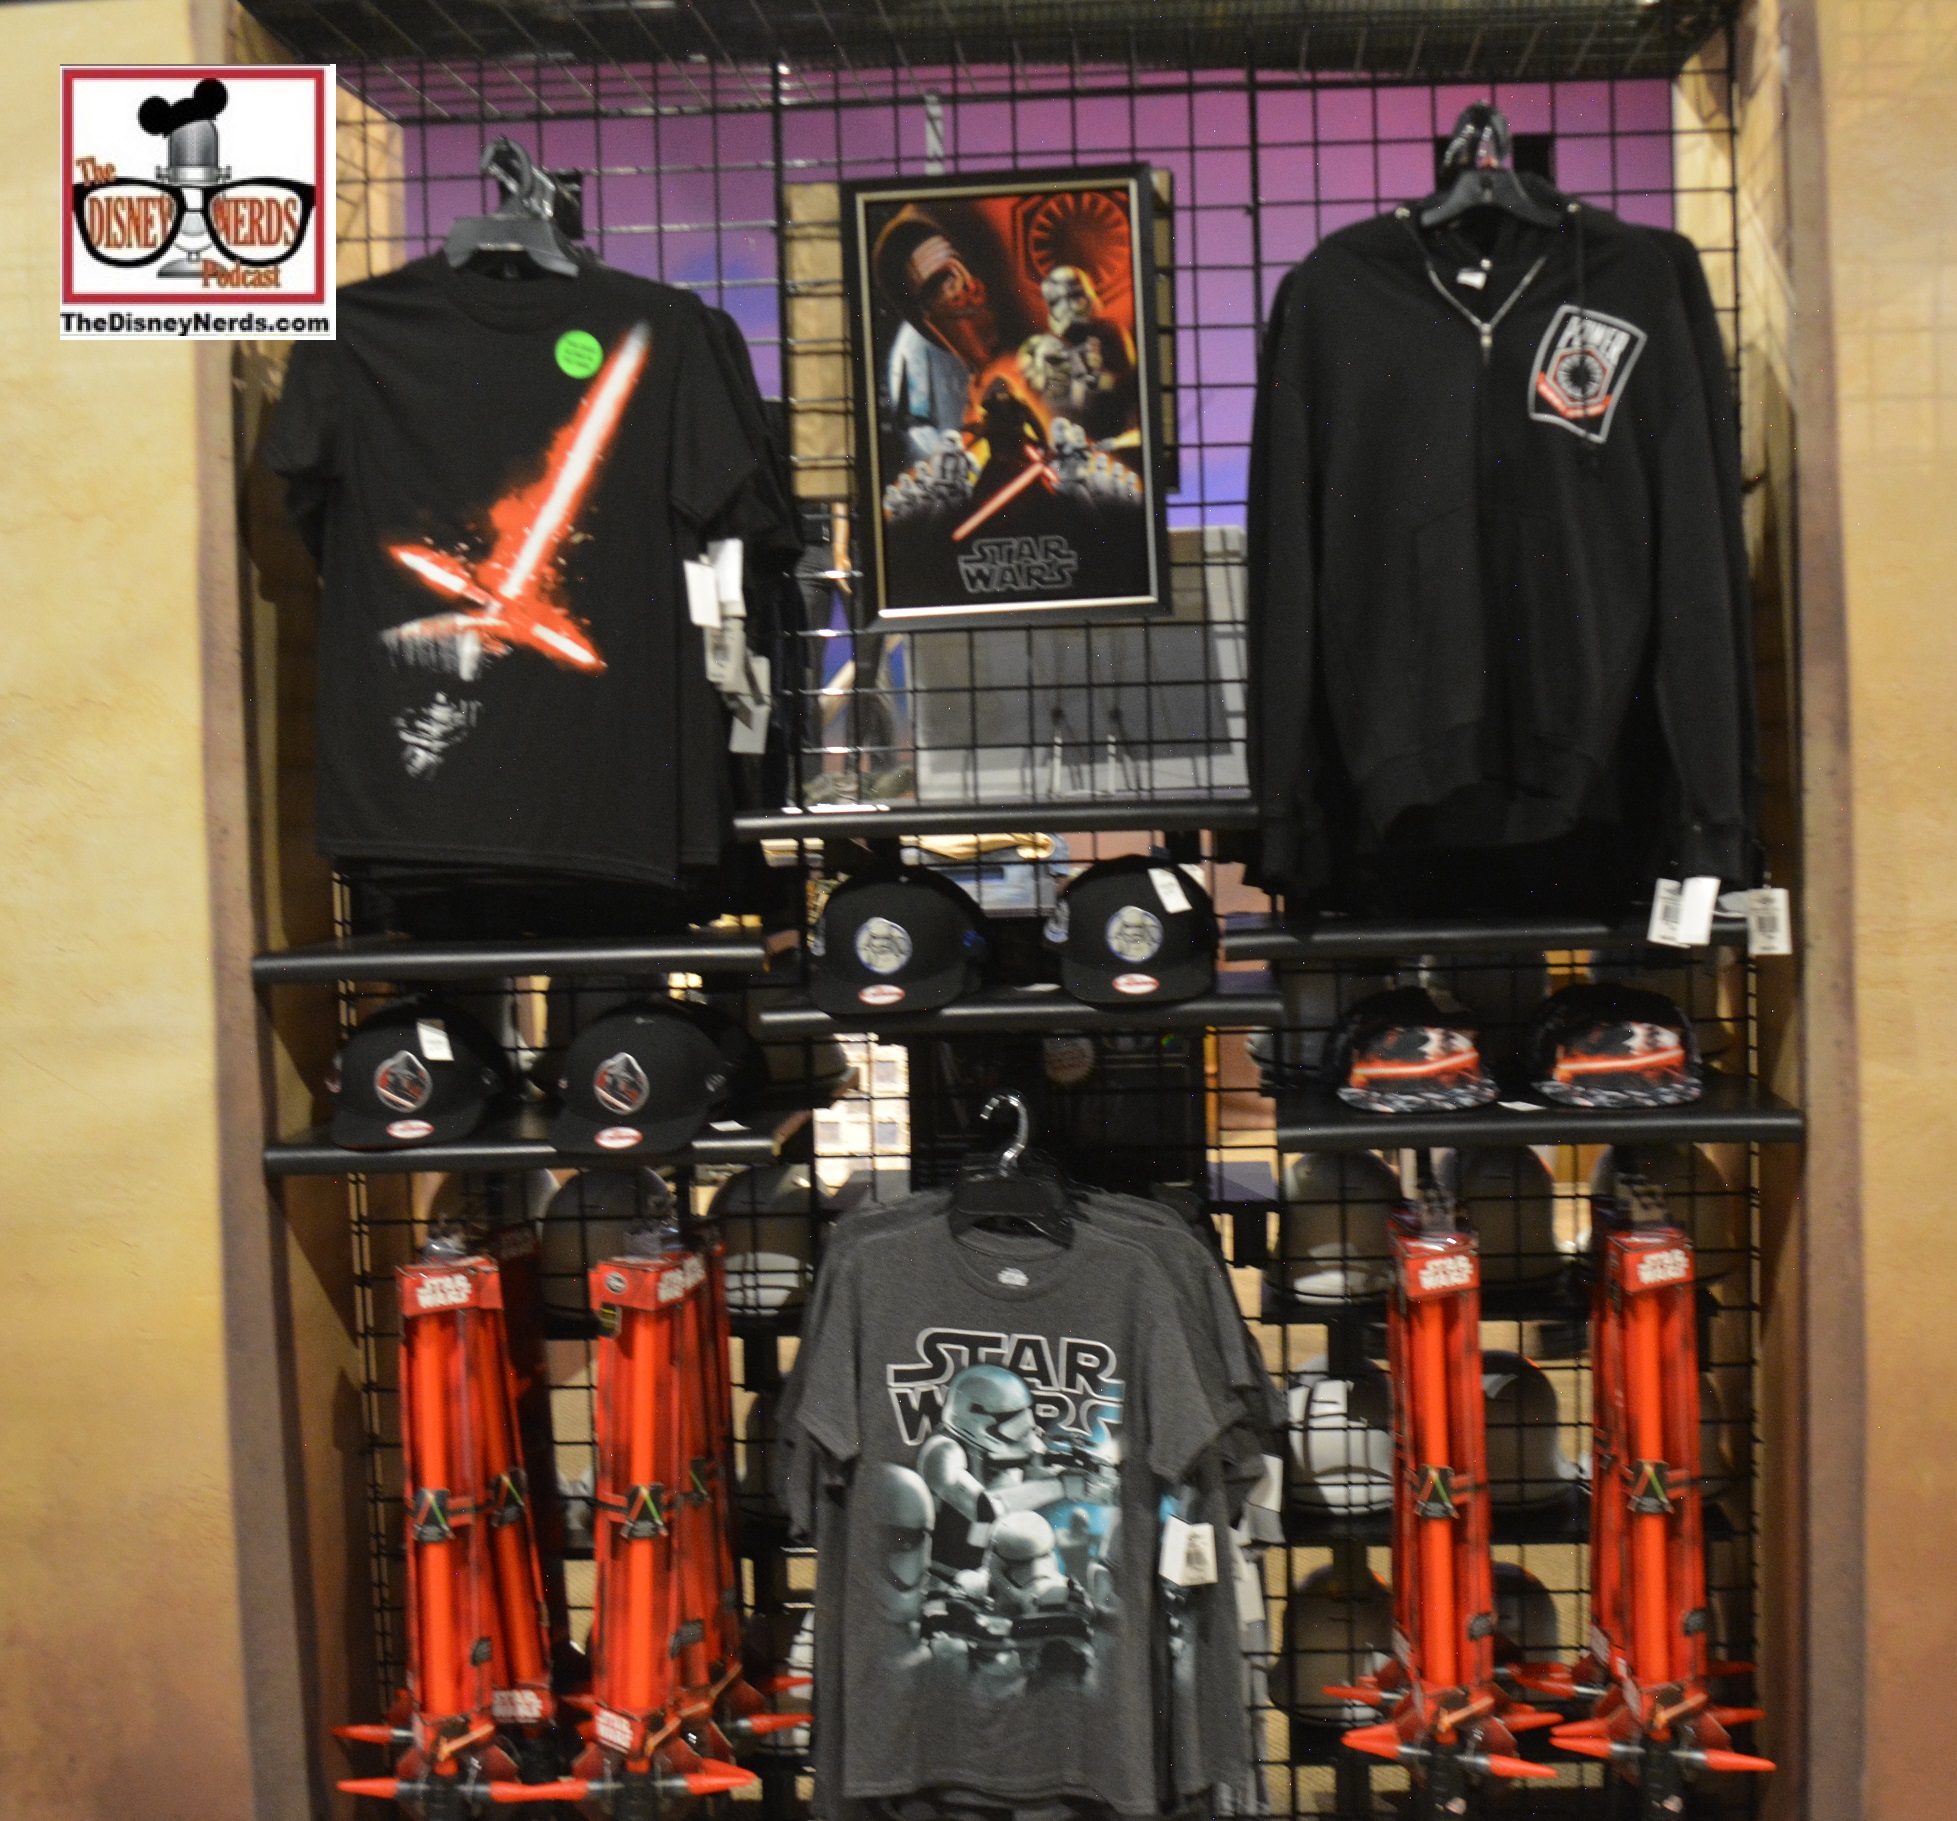 Watto's Grotto reopened, looking exactly like it did for star wars weekend, with all new Episode 7 merchandise.